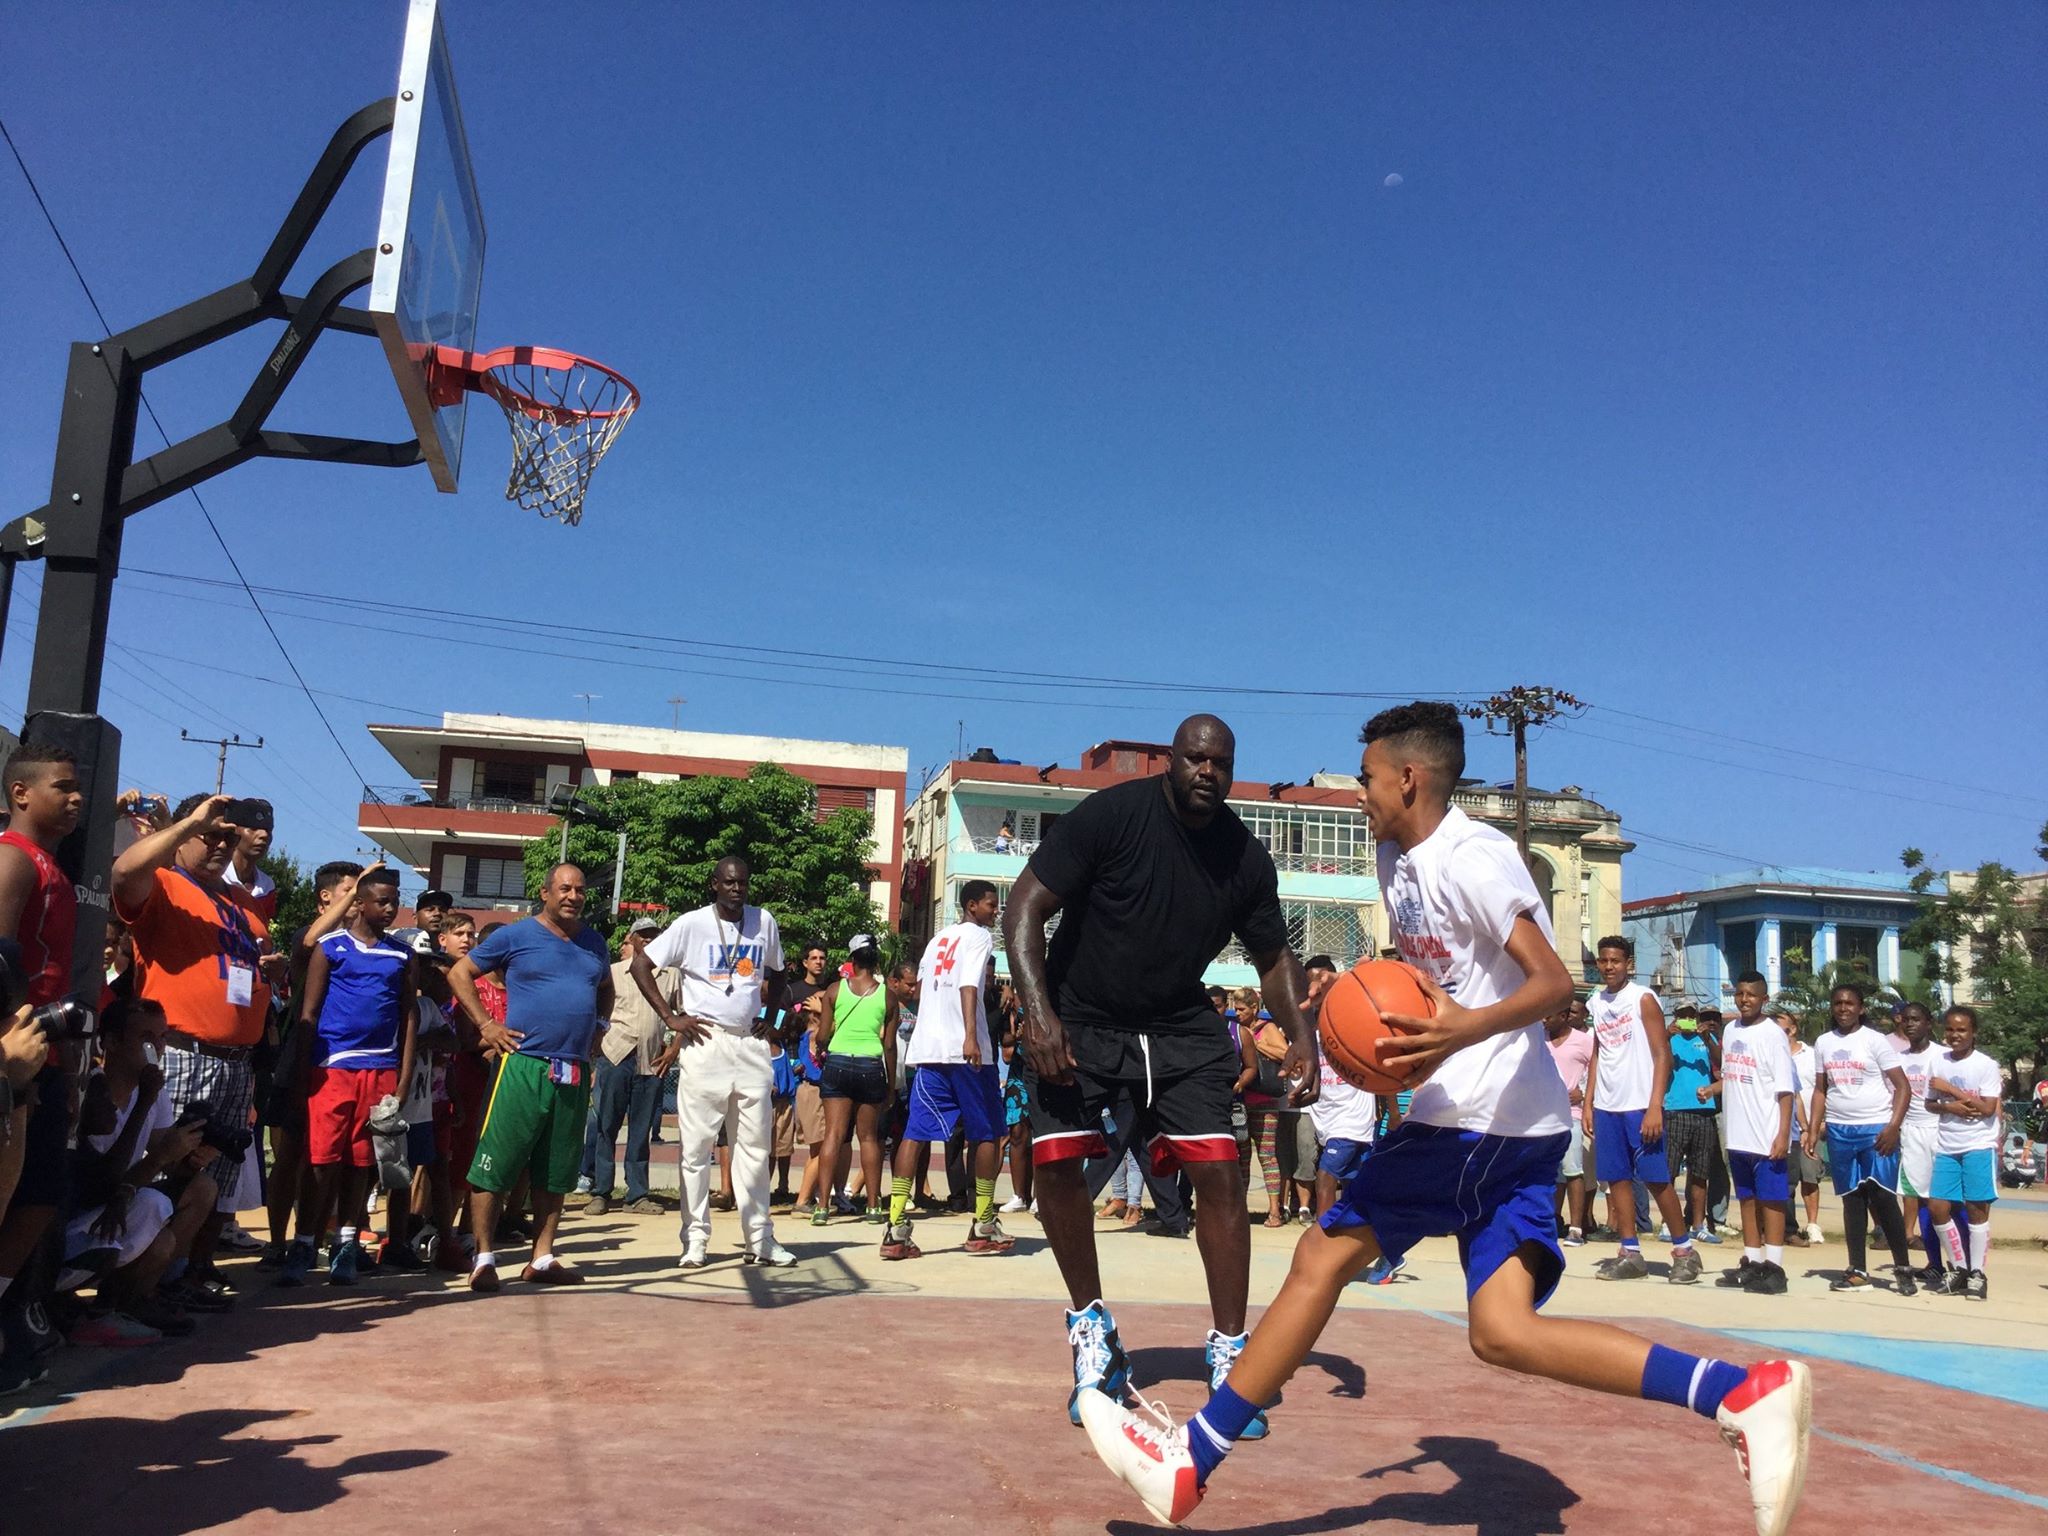 2016 Cuba Basketball program with Shaquille O'Neal.